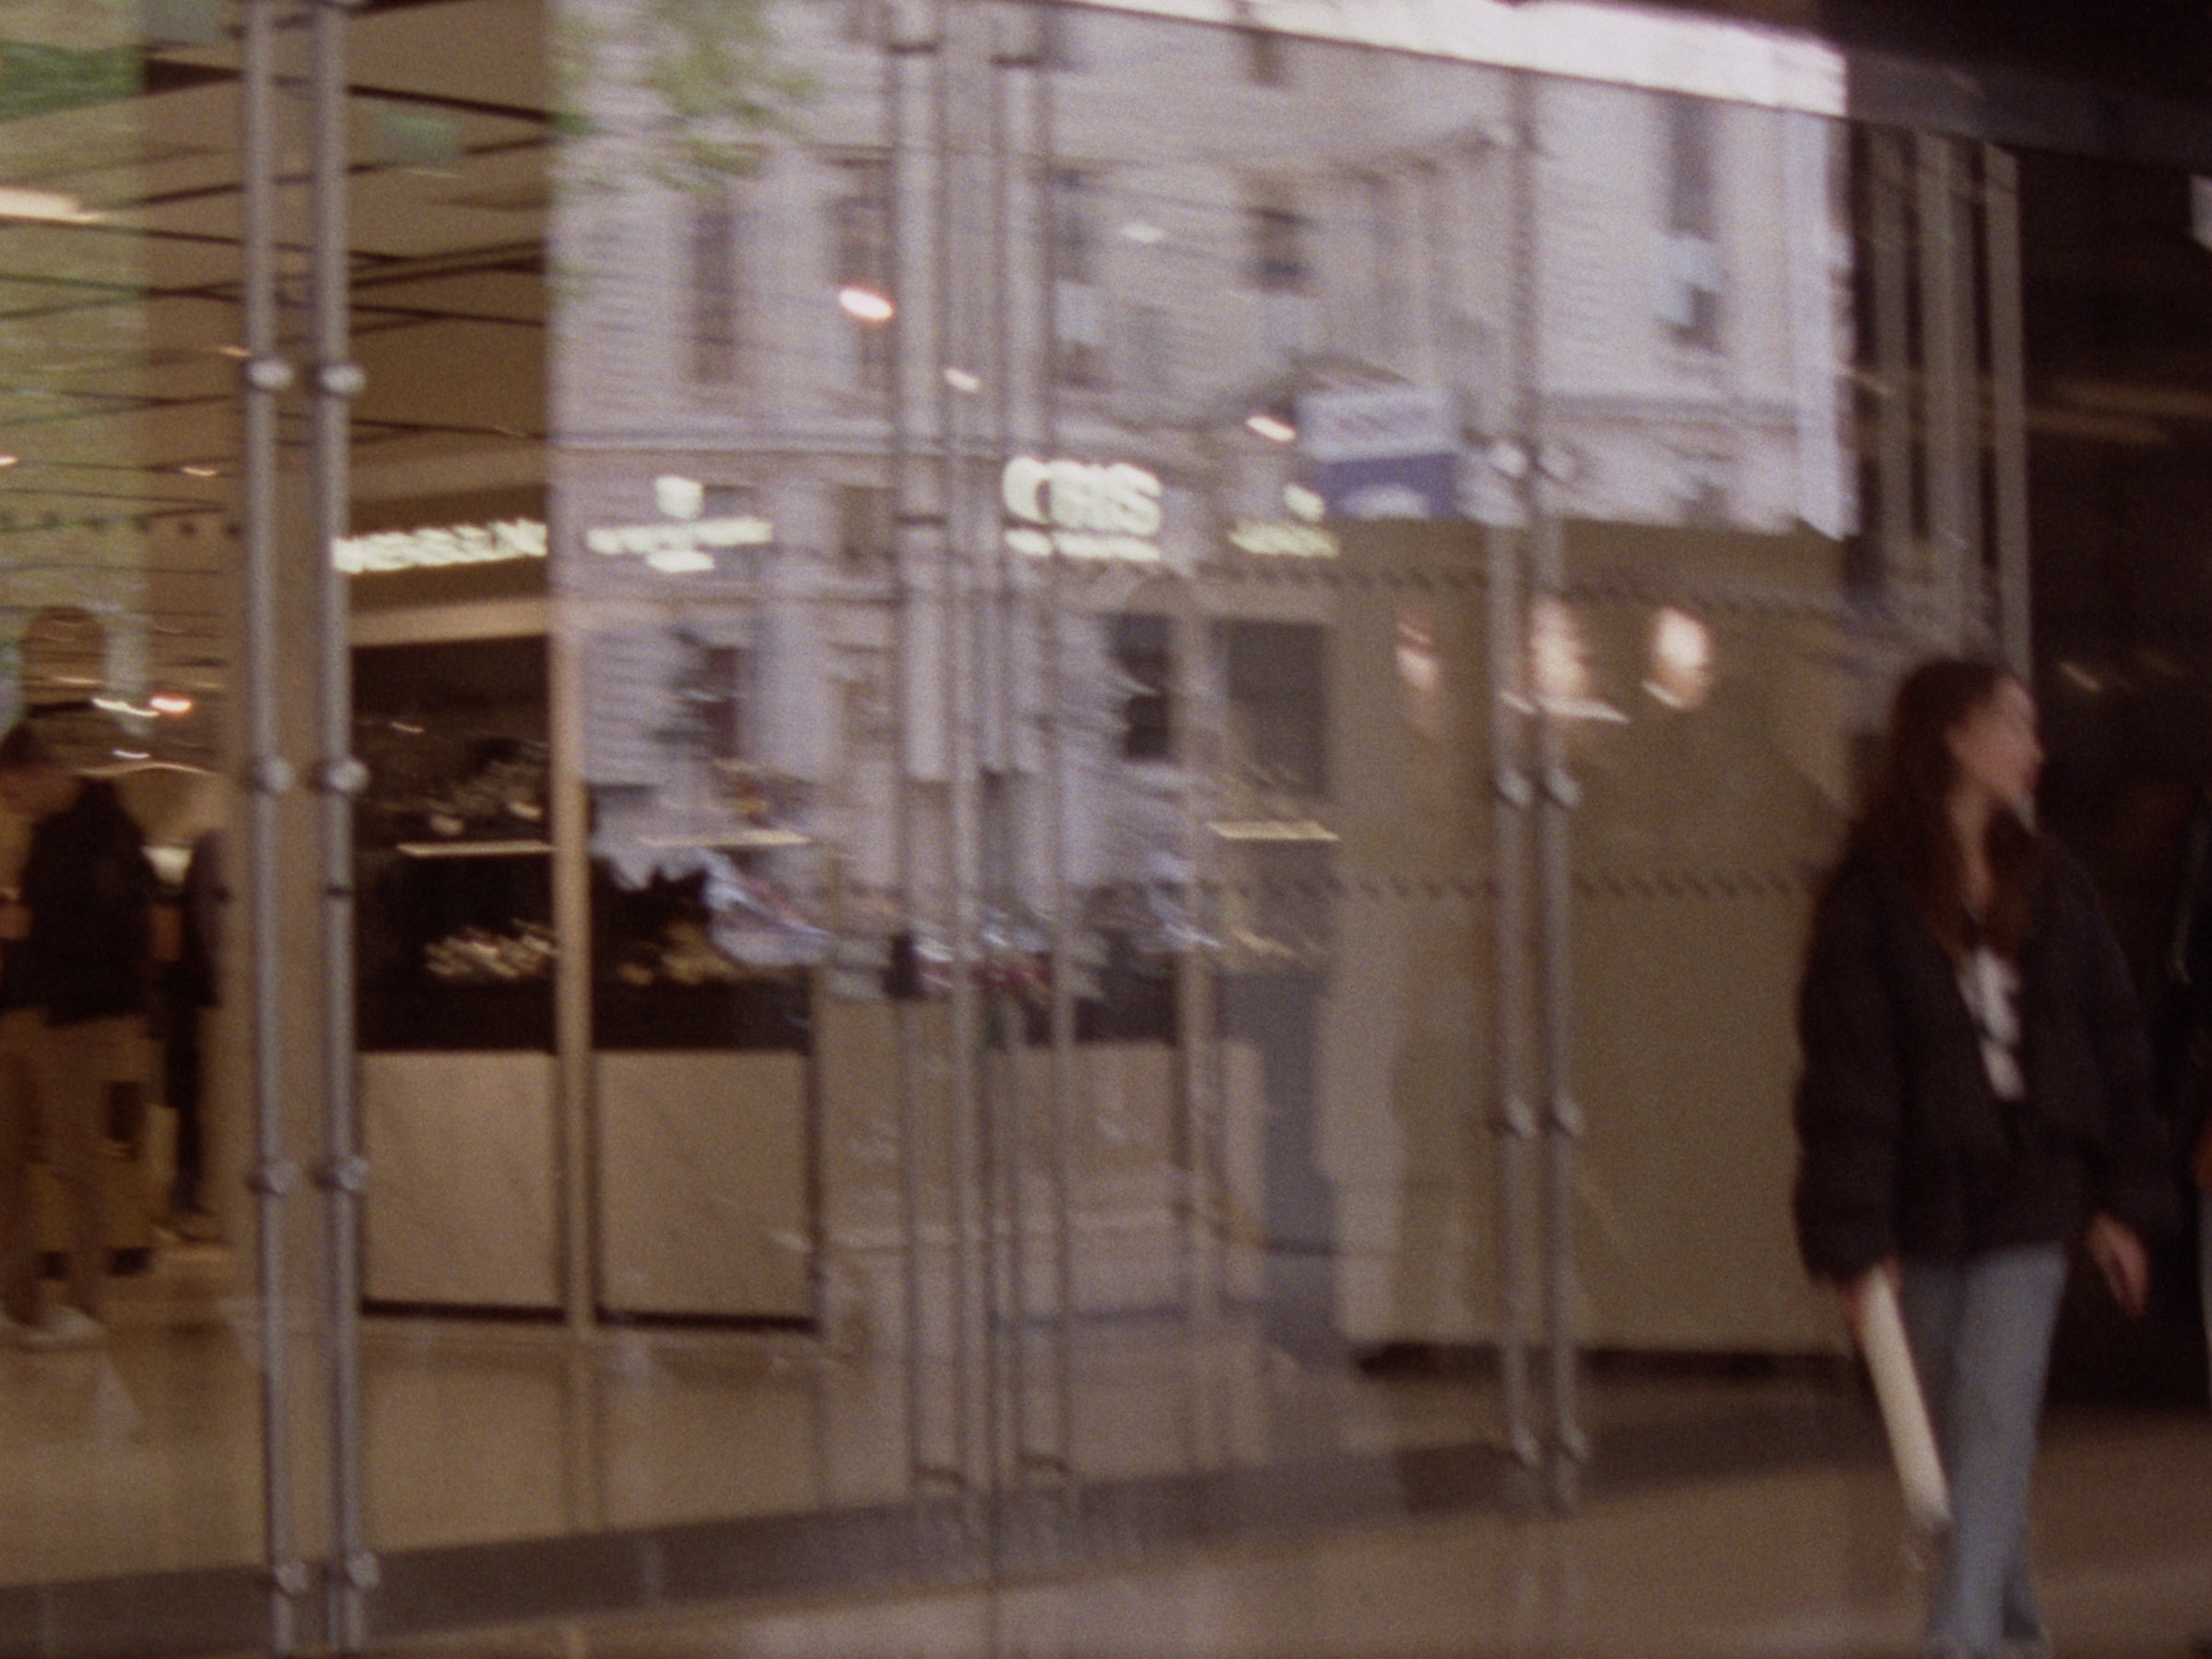 16 mm film still: a blurry image of the doors of the Galeries Lafayette